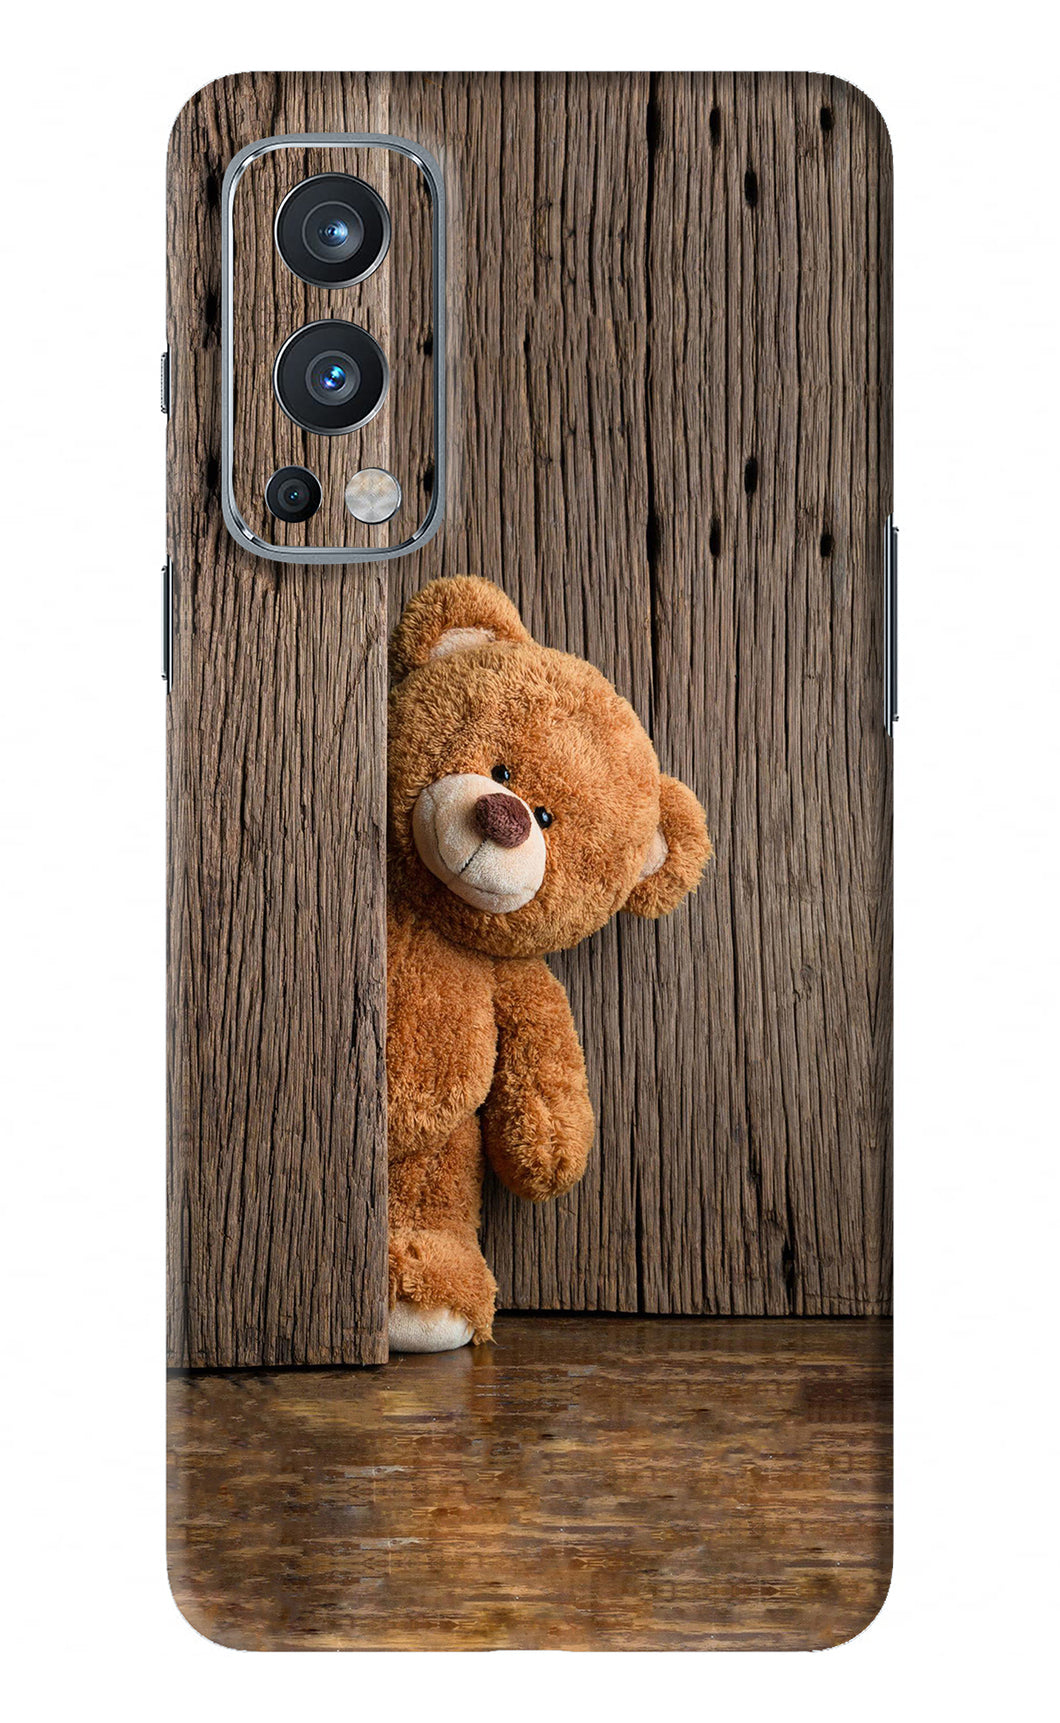 Teddy Wooden Oneplus Nord 2 Back Skin Wrap